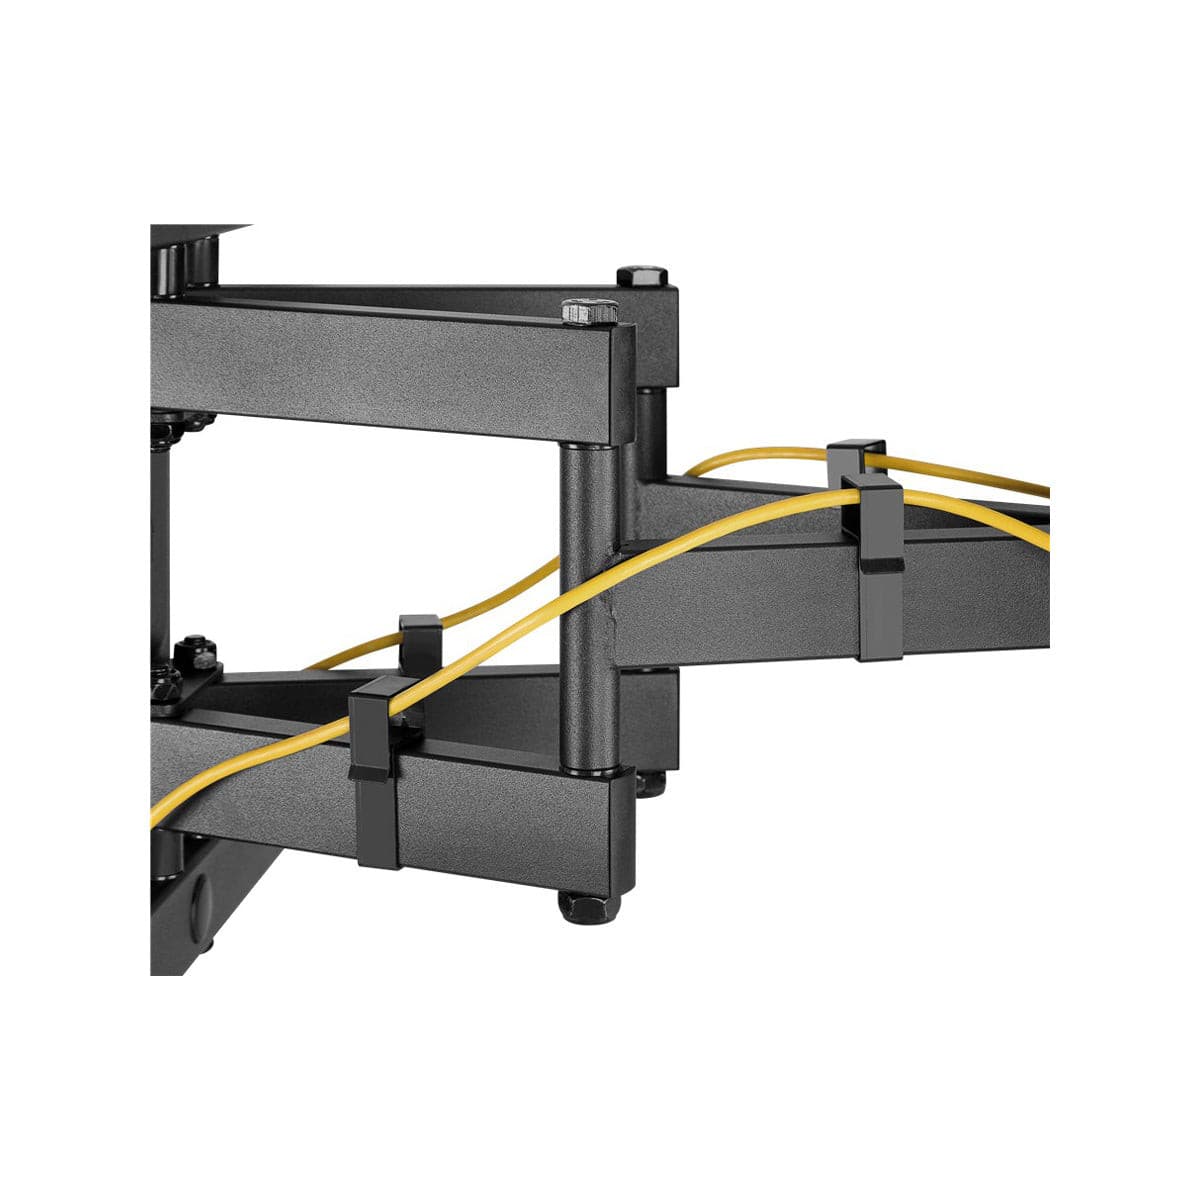 Goobay Pro Fullmotion TV Wall Mount Fully Movable Swivelling Tilting Large (37-70